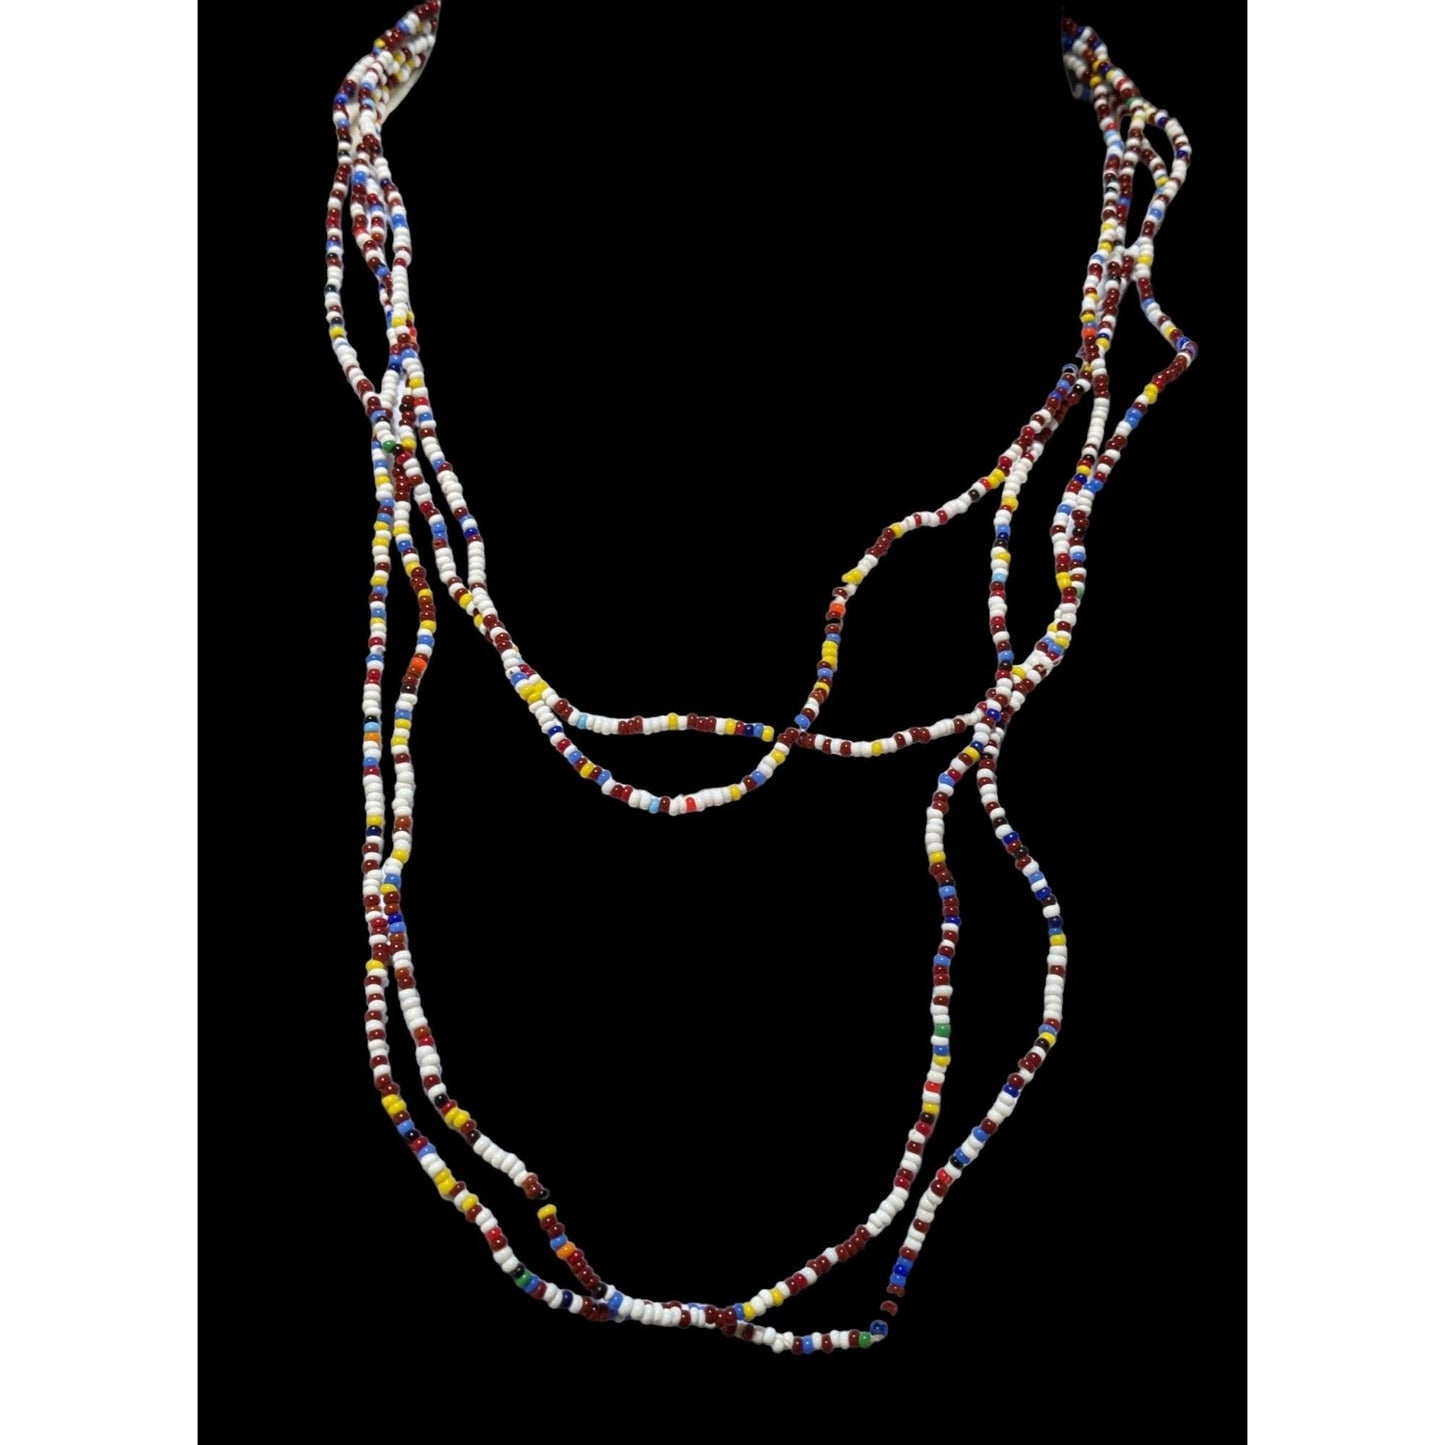 Long Glass Beaded Necklace